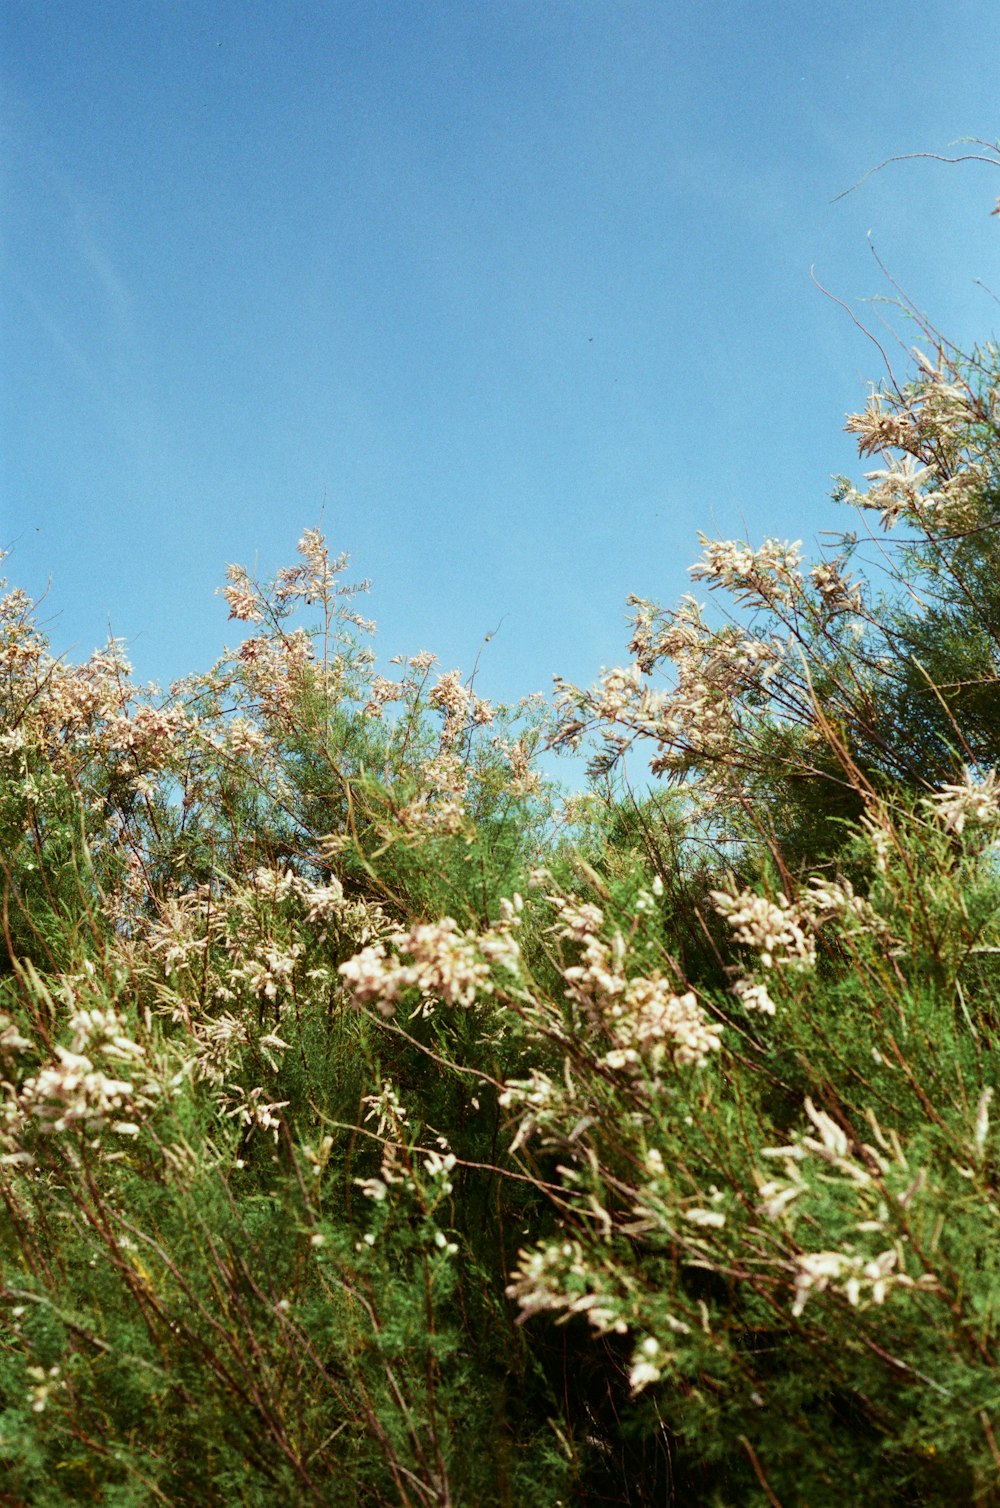 a blue sky with some white flowers in the foreground